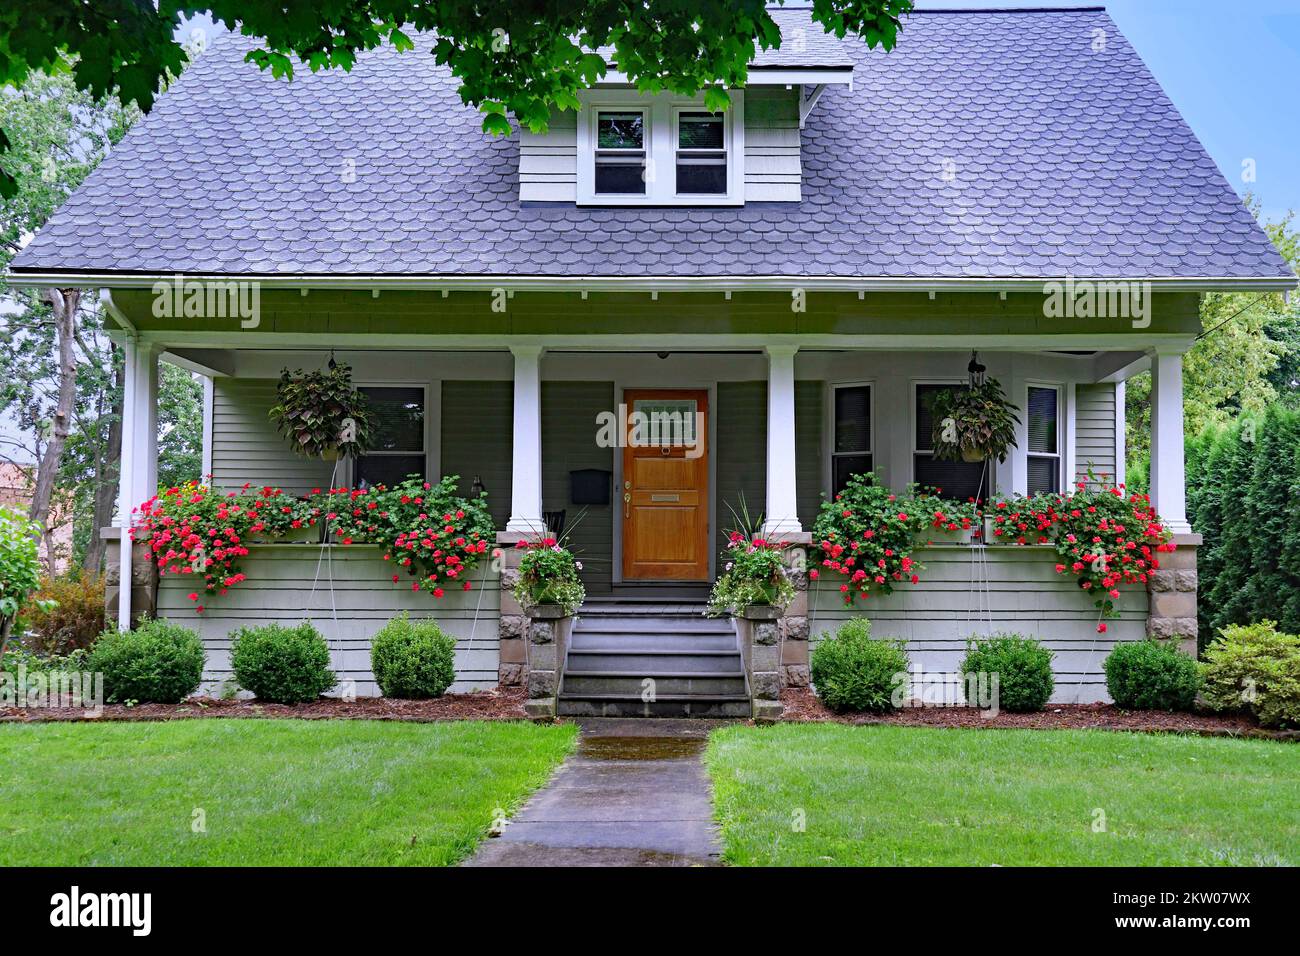 Home with large front porch with baskets of flowers Stock Photo